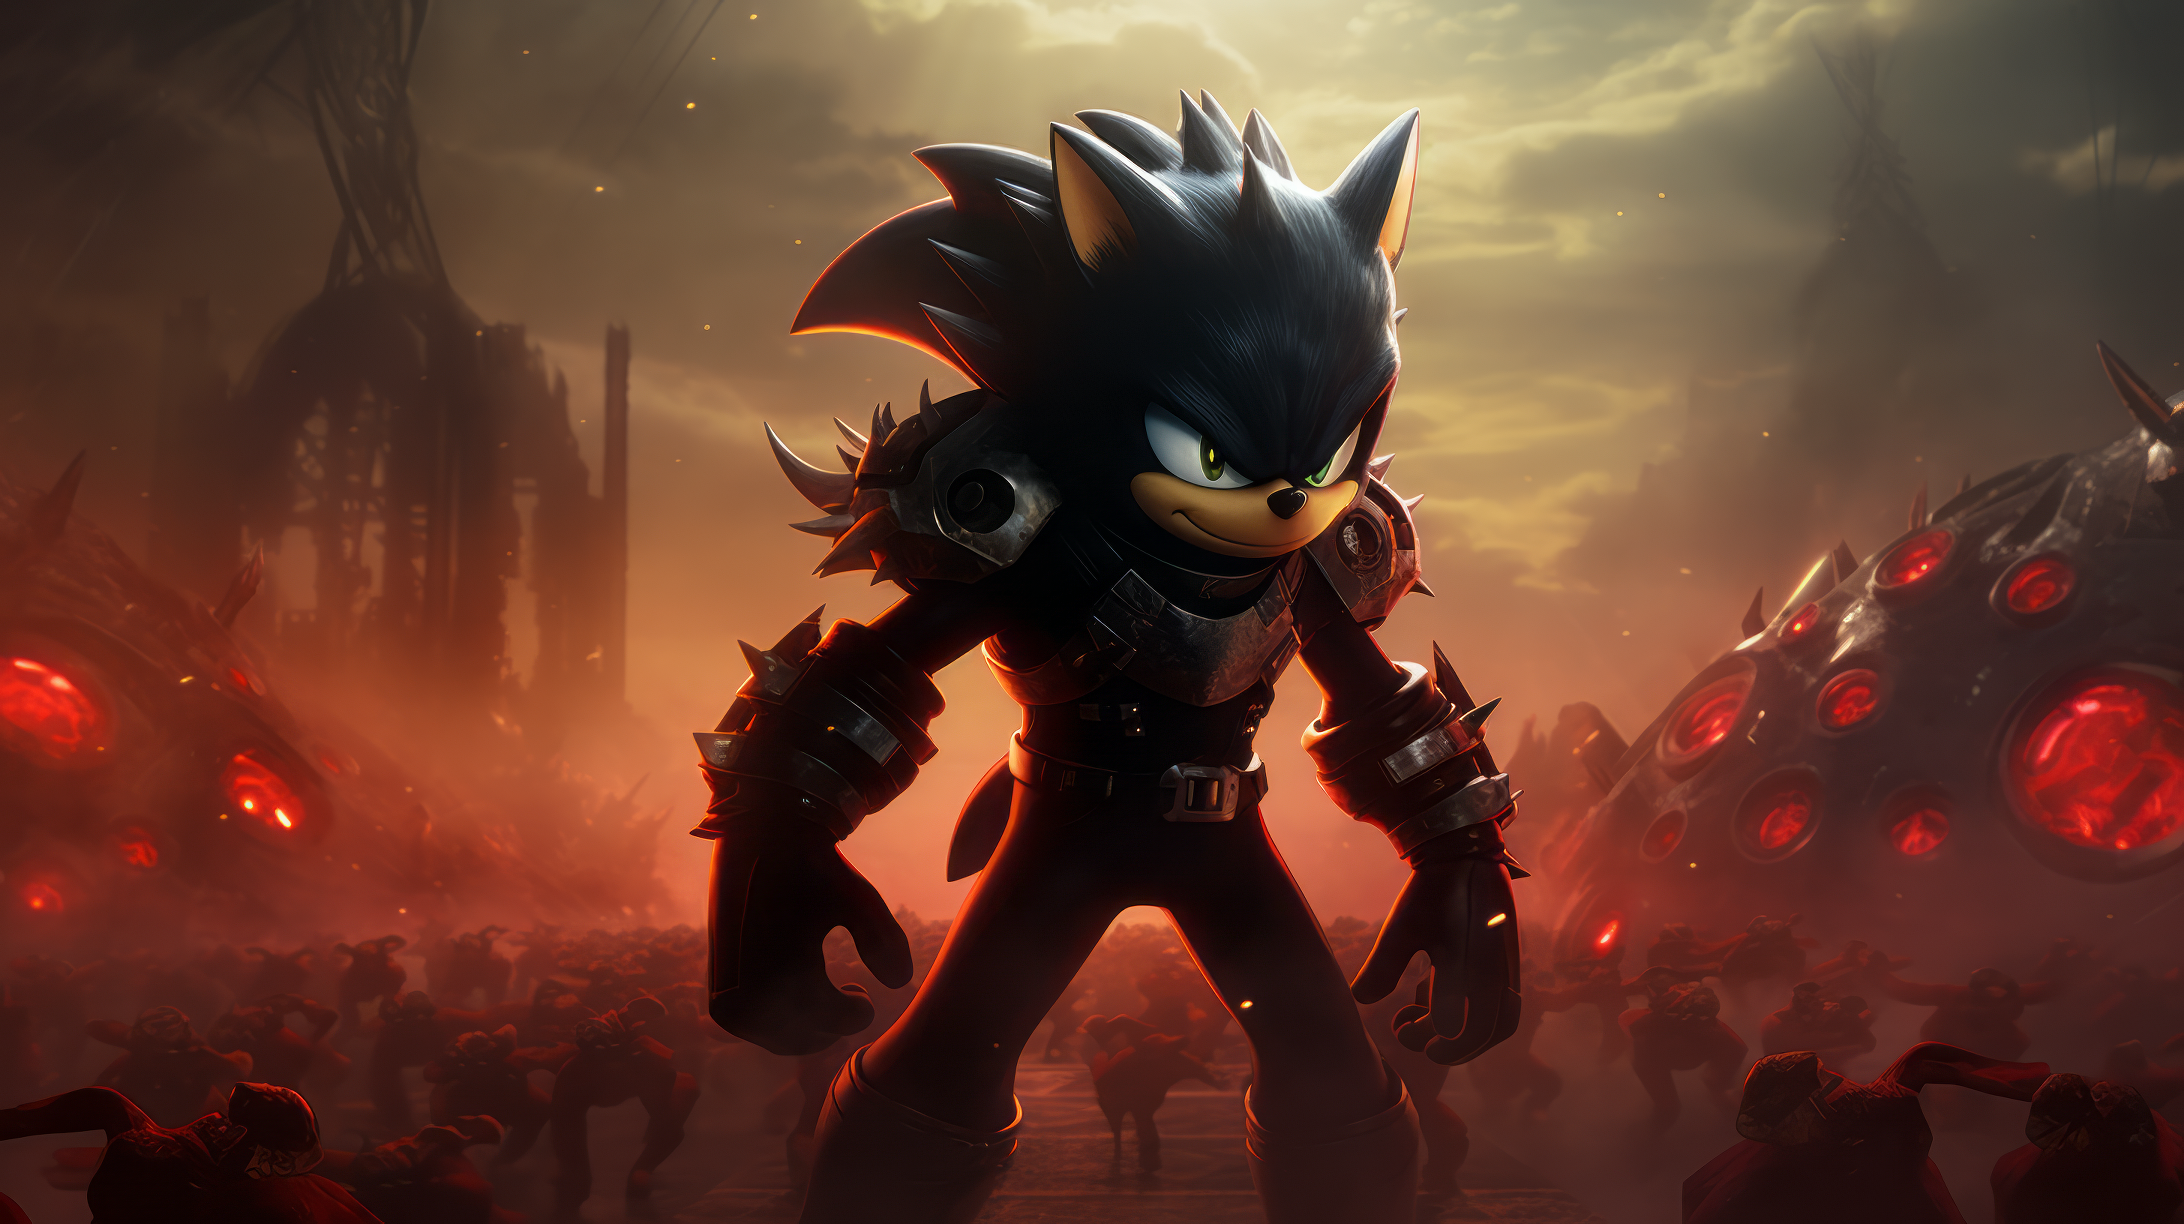 HD desktop wallpaper featuring Shadow the Hedgehog from Sonic the Hedgehog series, with an intense, fiery battlefield background.